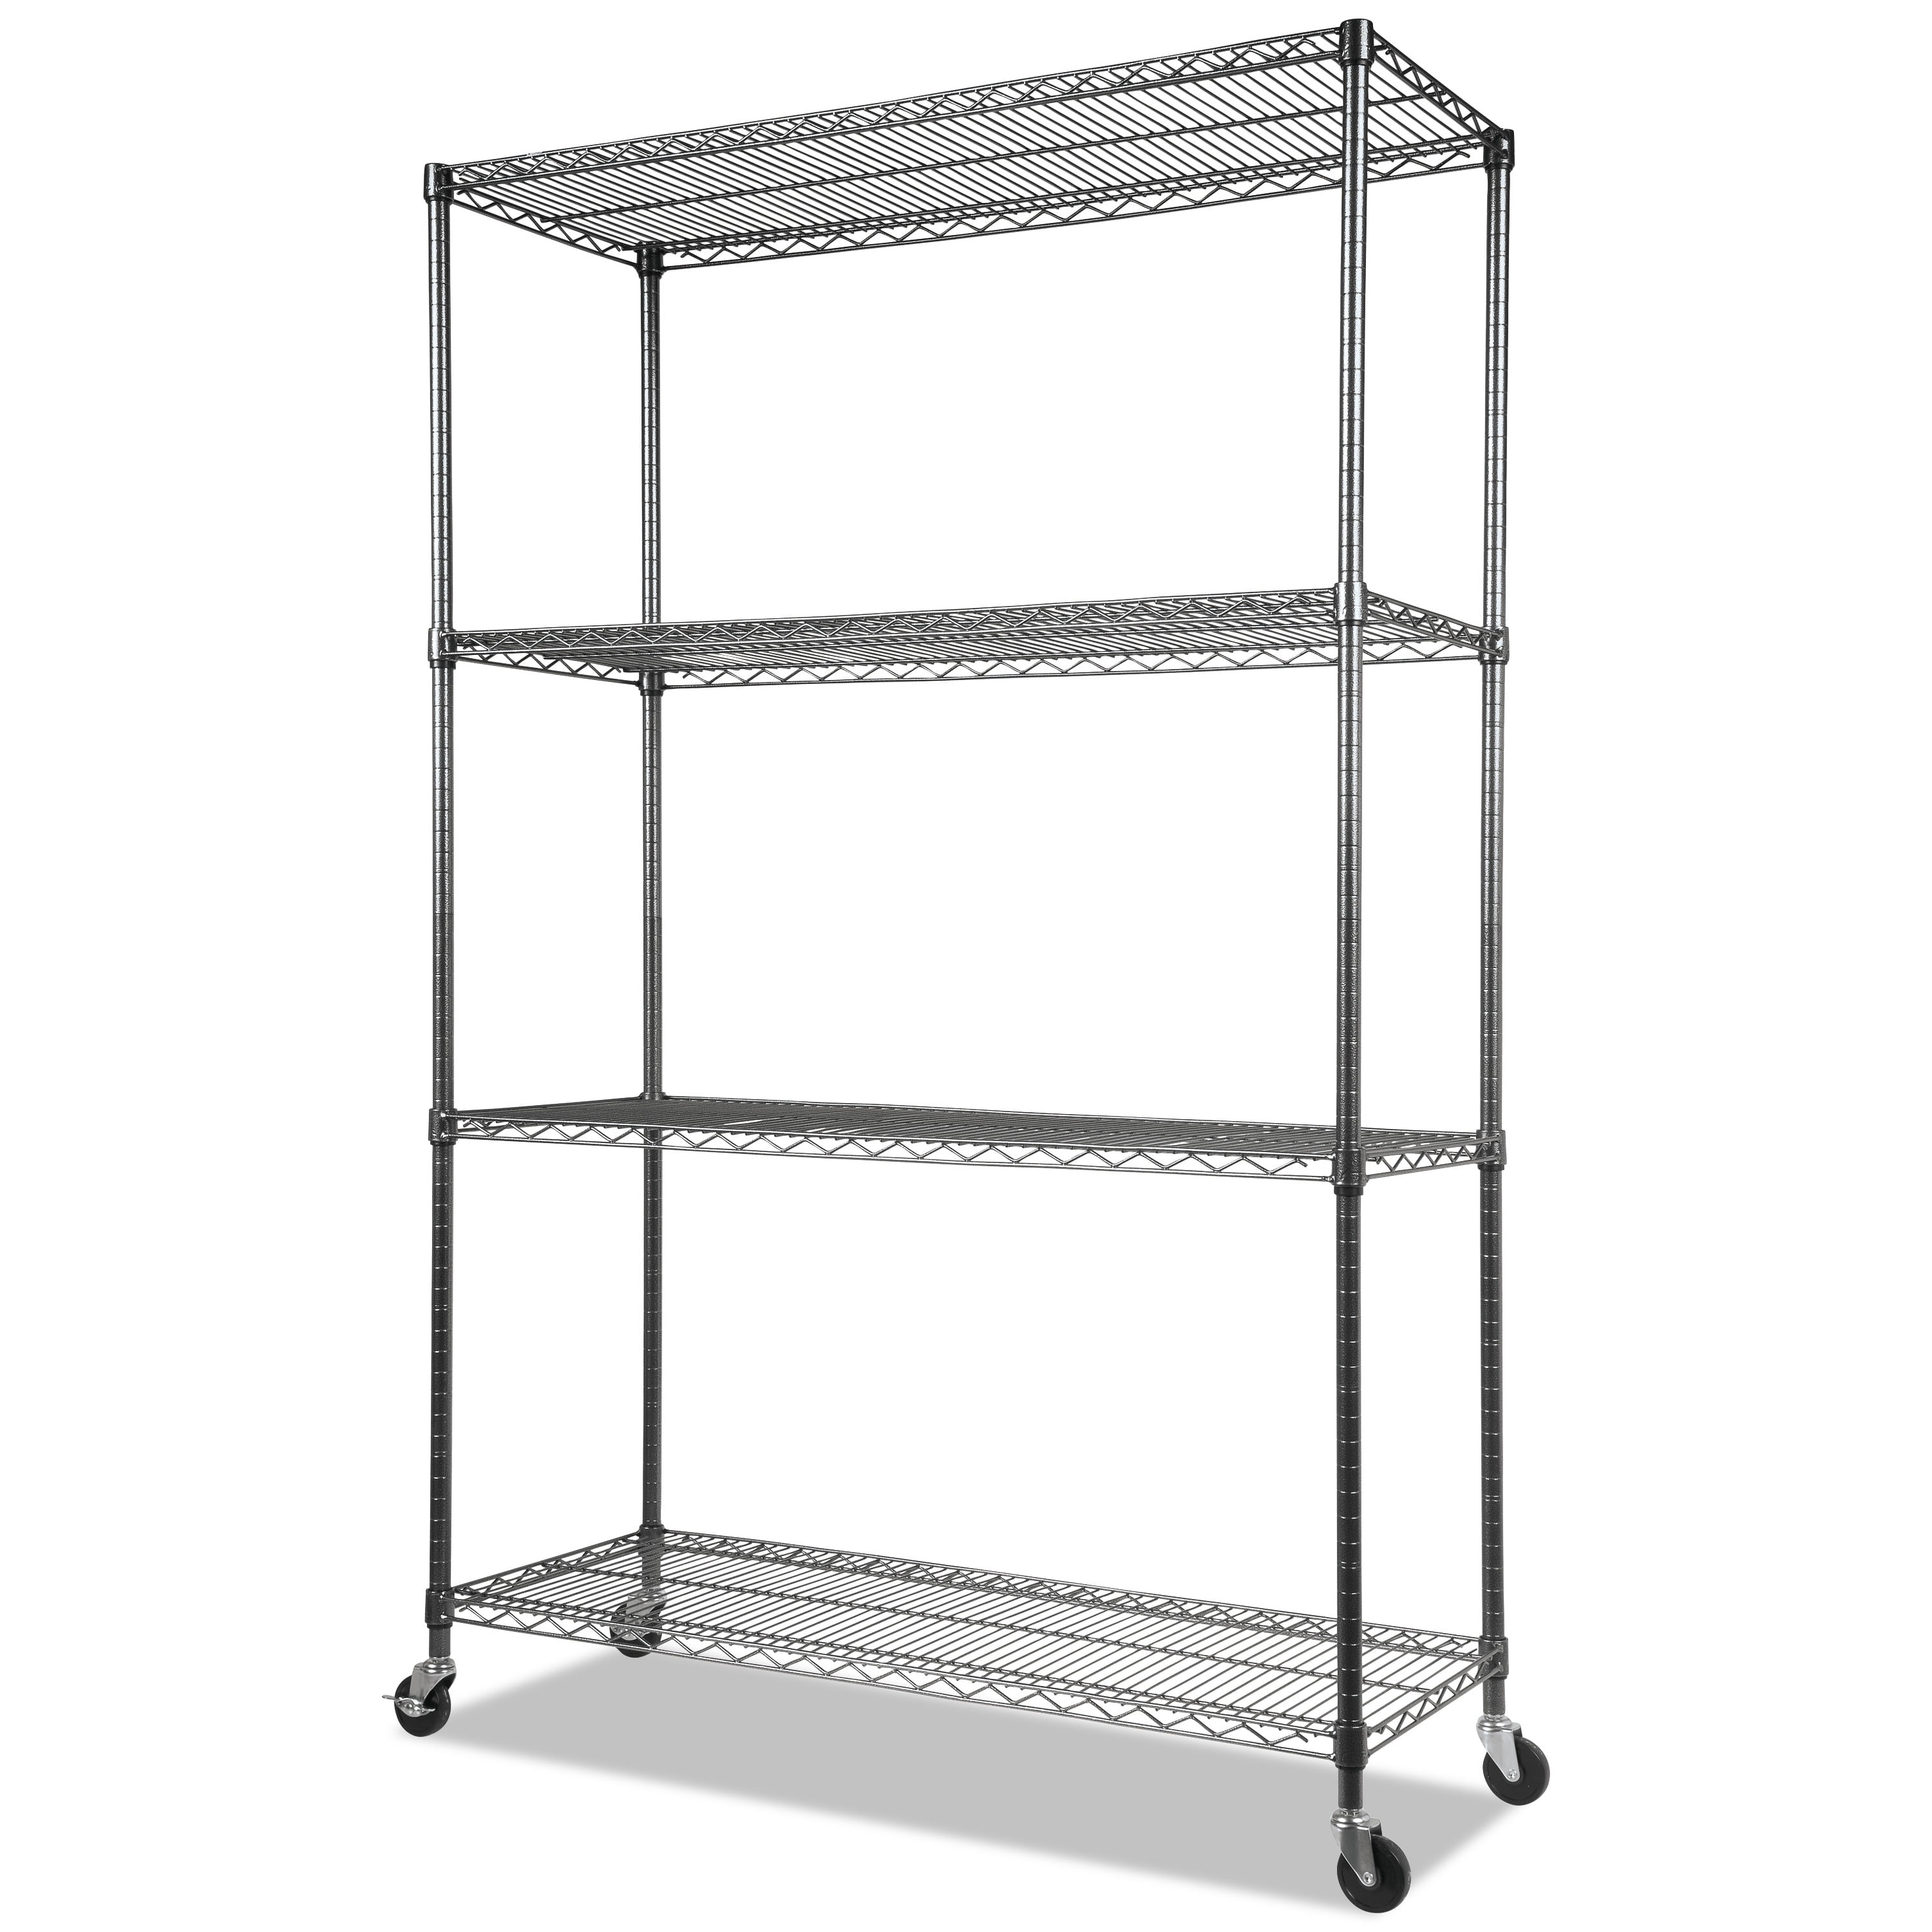 Wire Shelving Unit With Casters, Caster Wheels For Wire Shelving